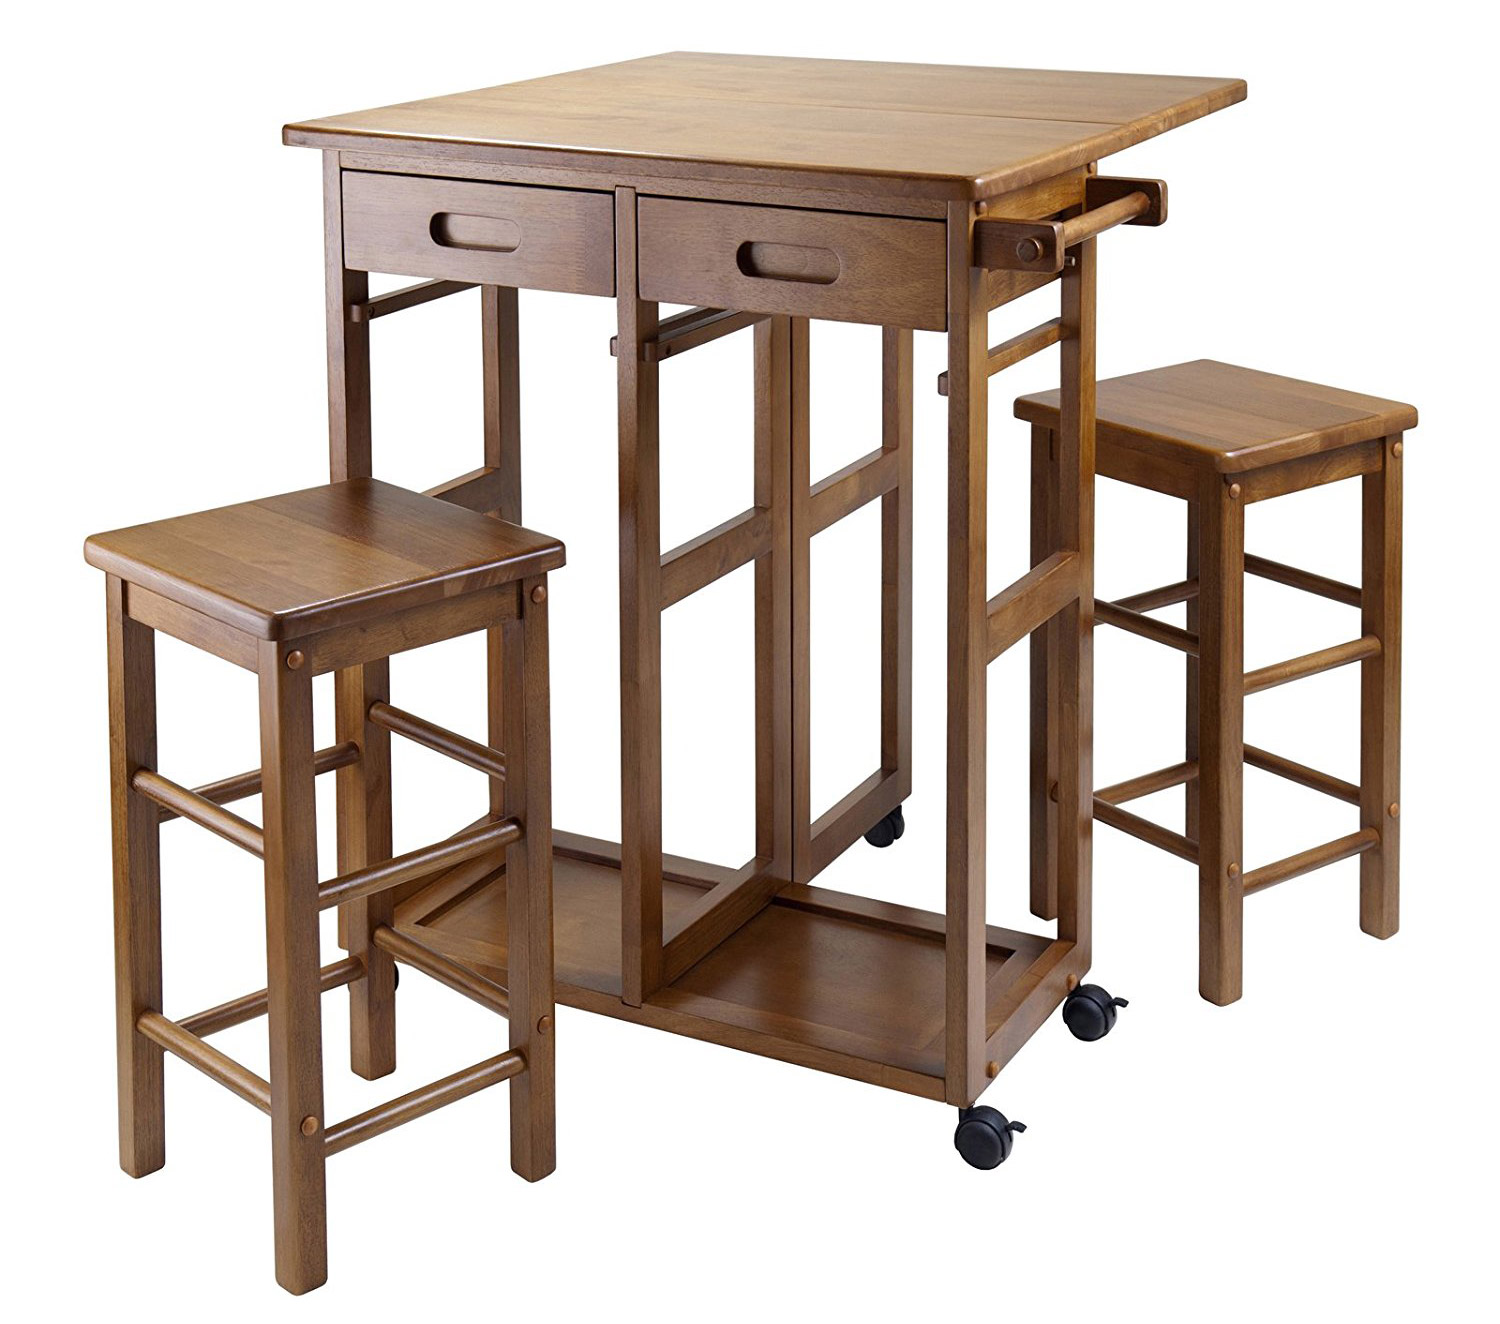 Choose a Folding Dining Table for a Small Space - Adorable ...